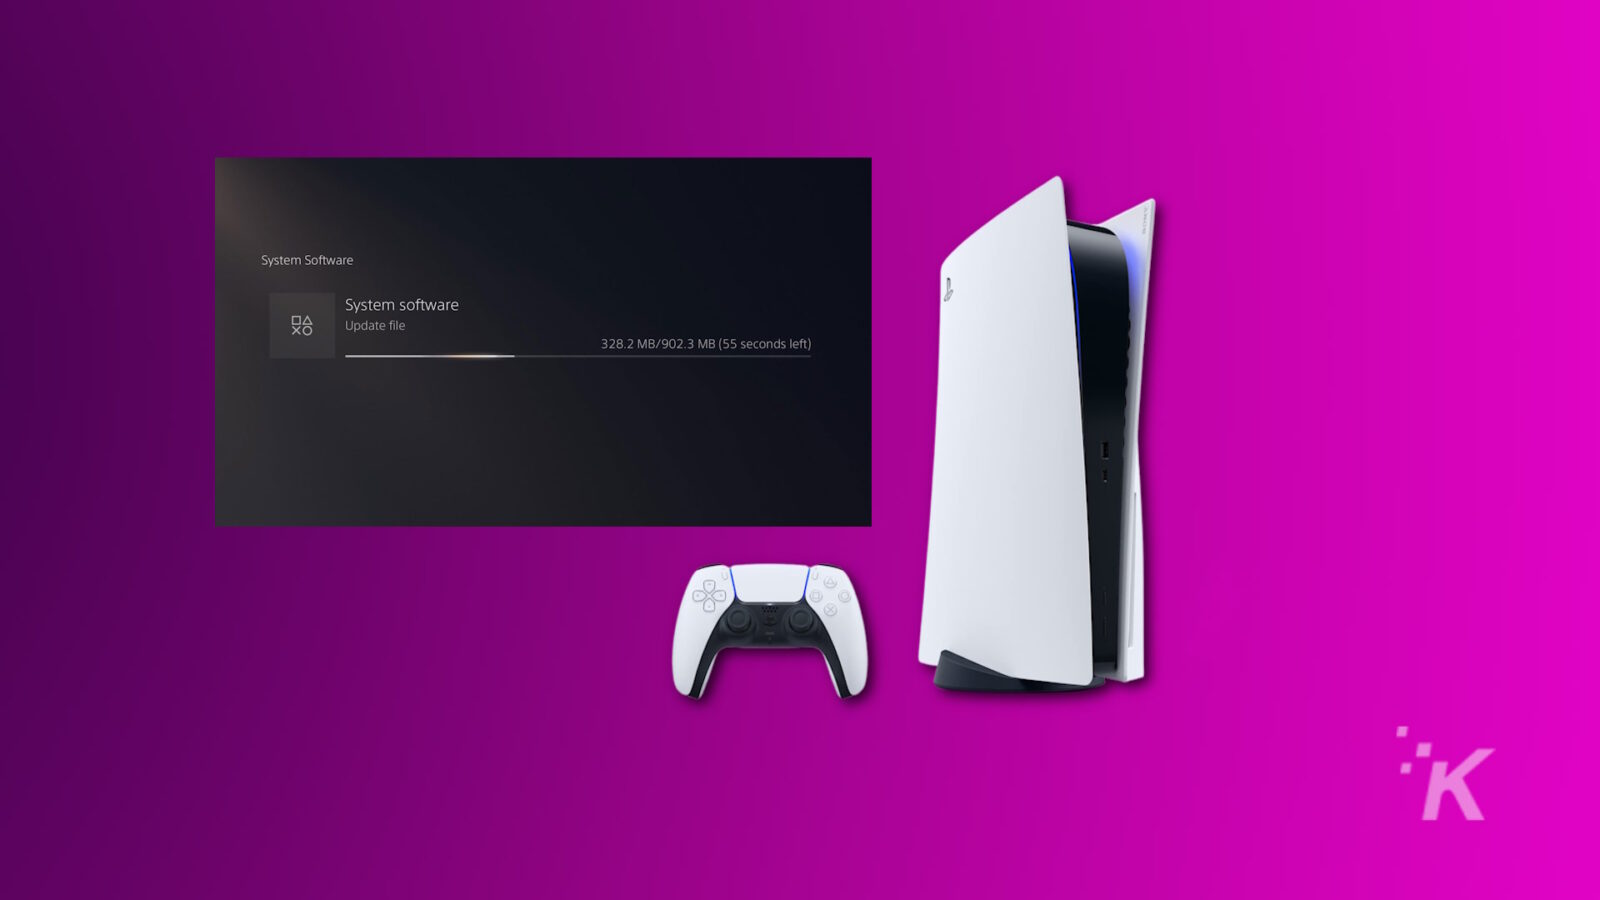 Ps5 system software update next to console